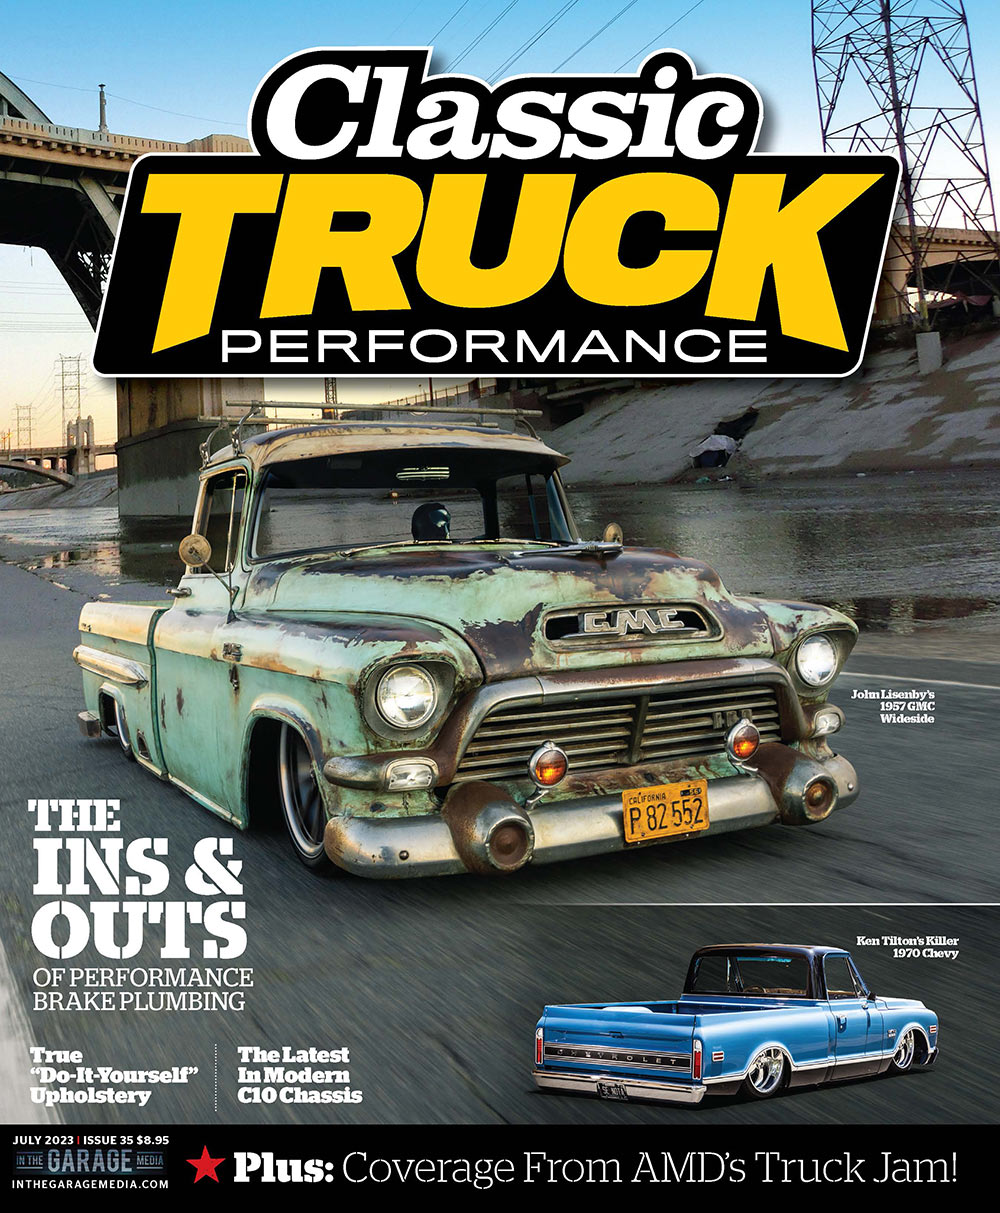 Classic Truck Performance July 2023 cover